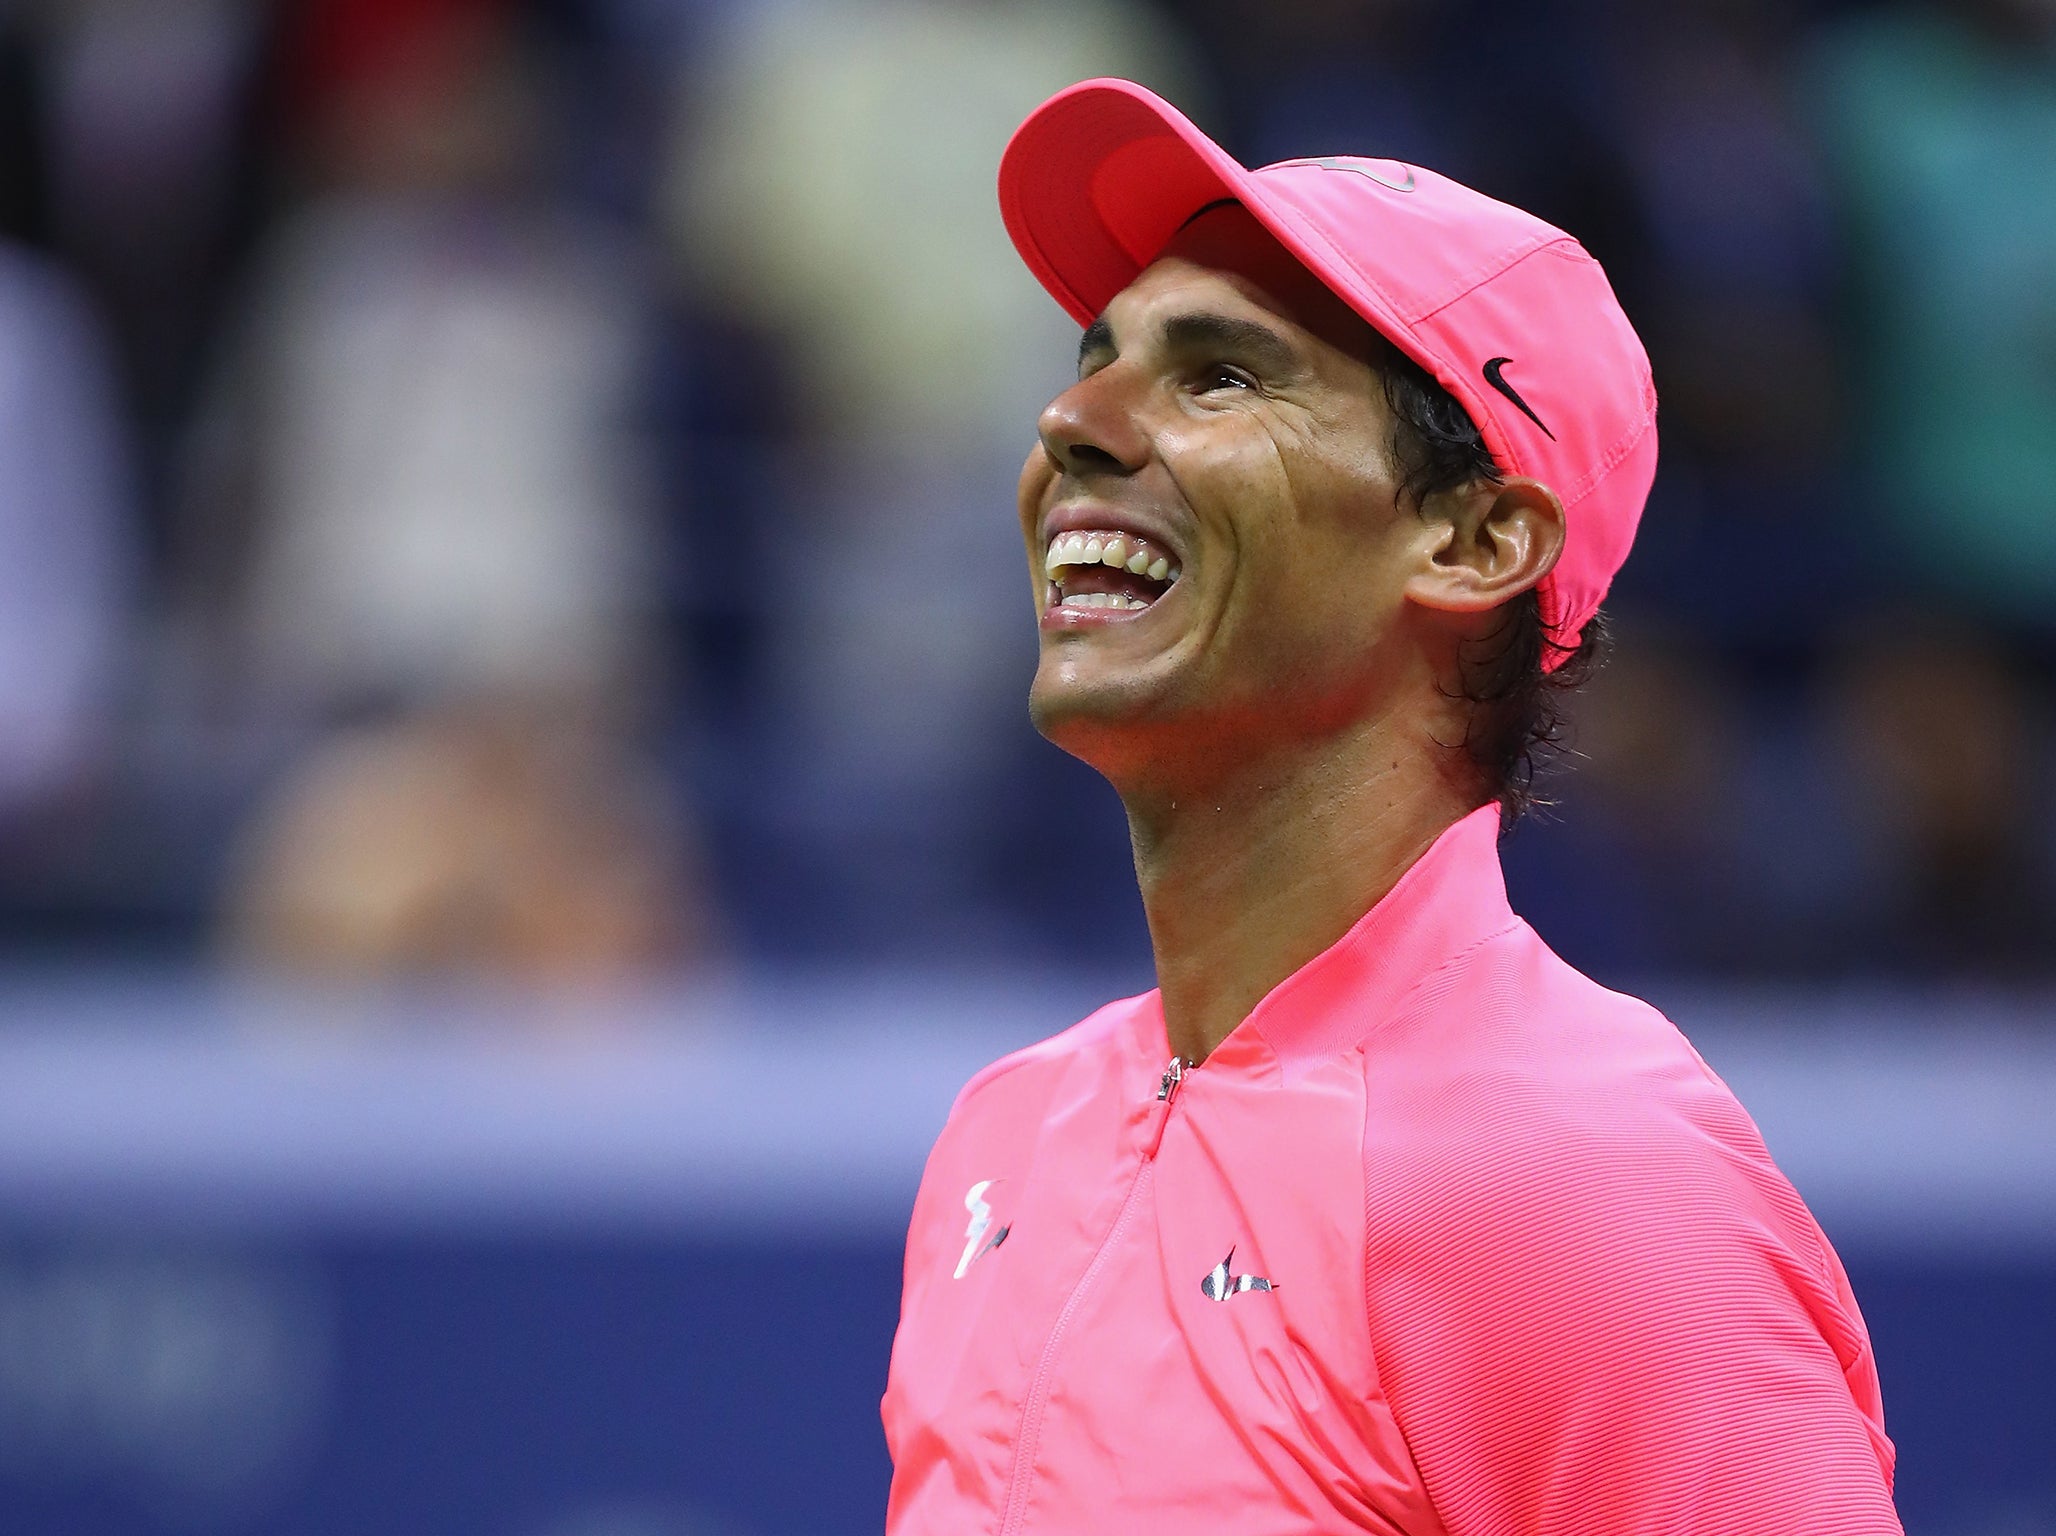 Nadal is the current favourite to win the tournament